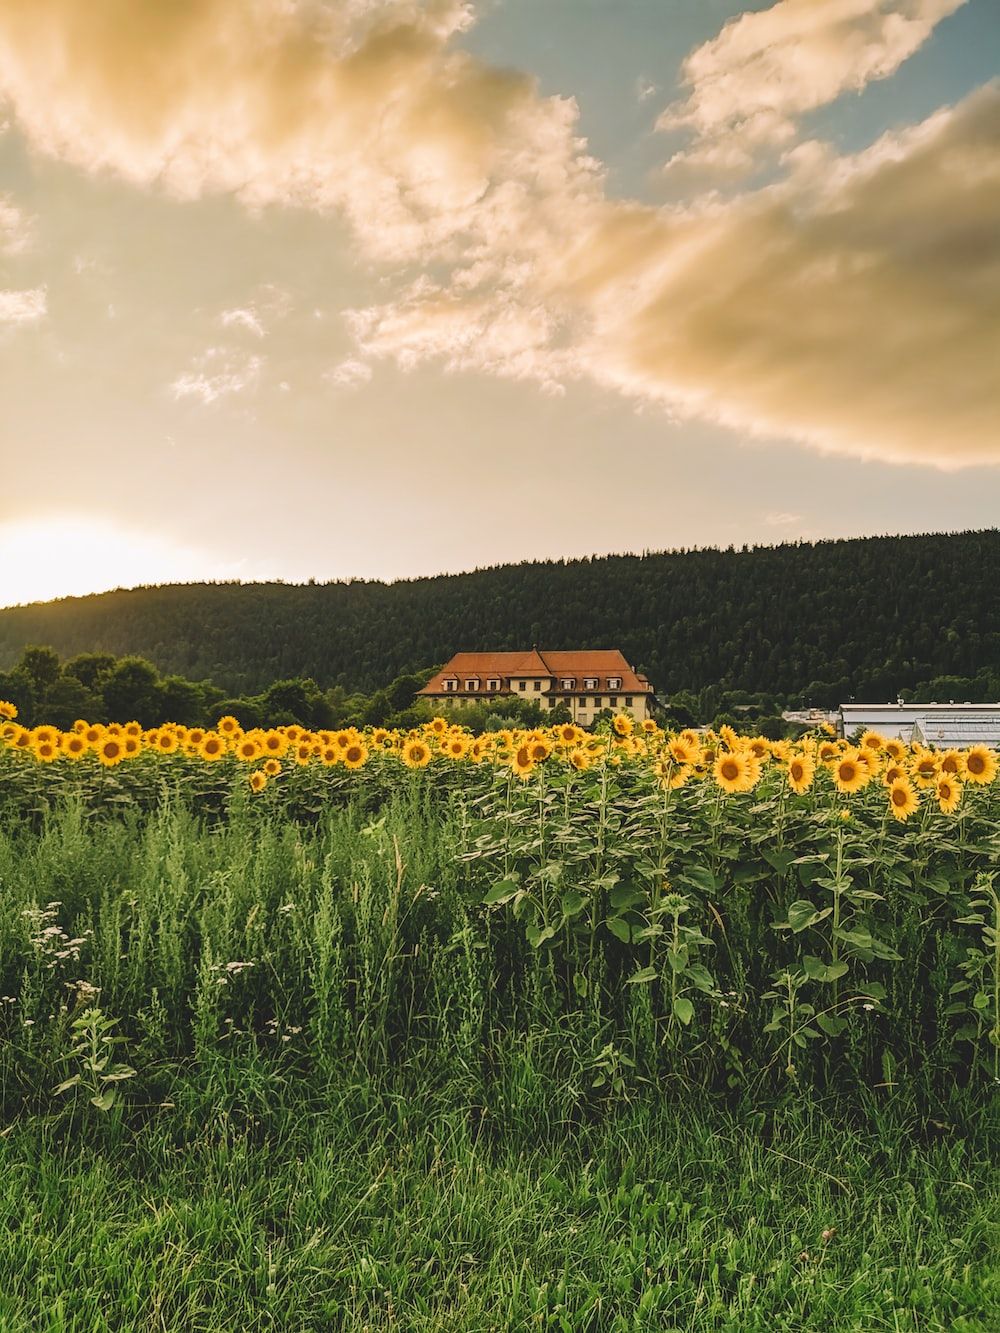 A field of sunflowers with a house in the background under a cloudy sky. - Farm